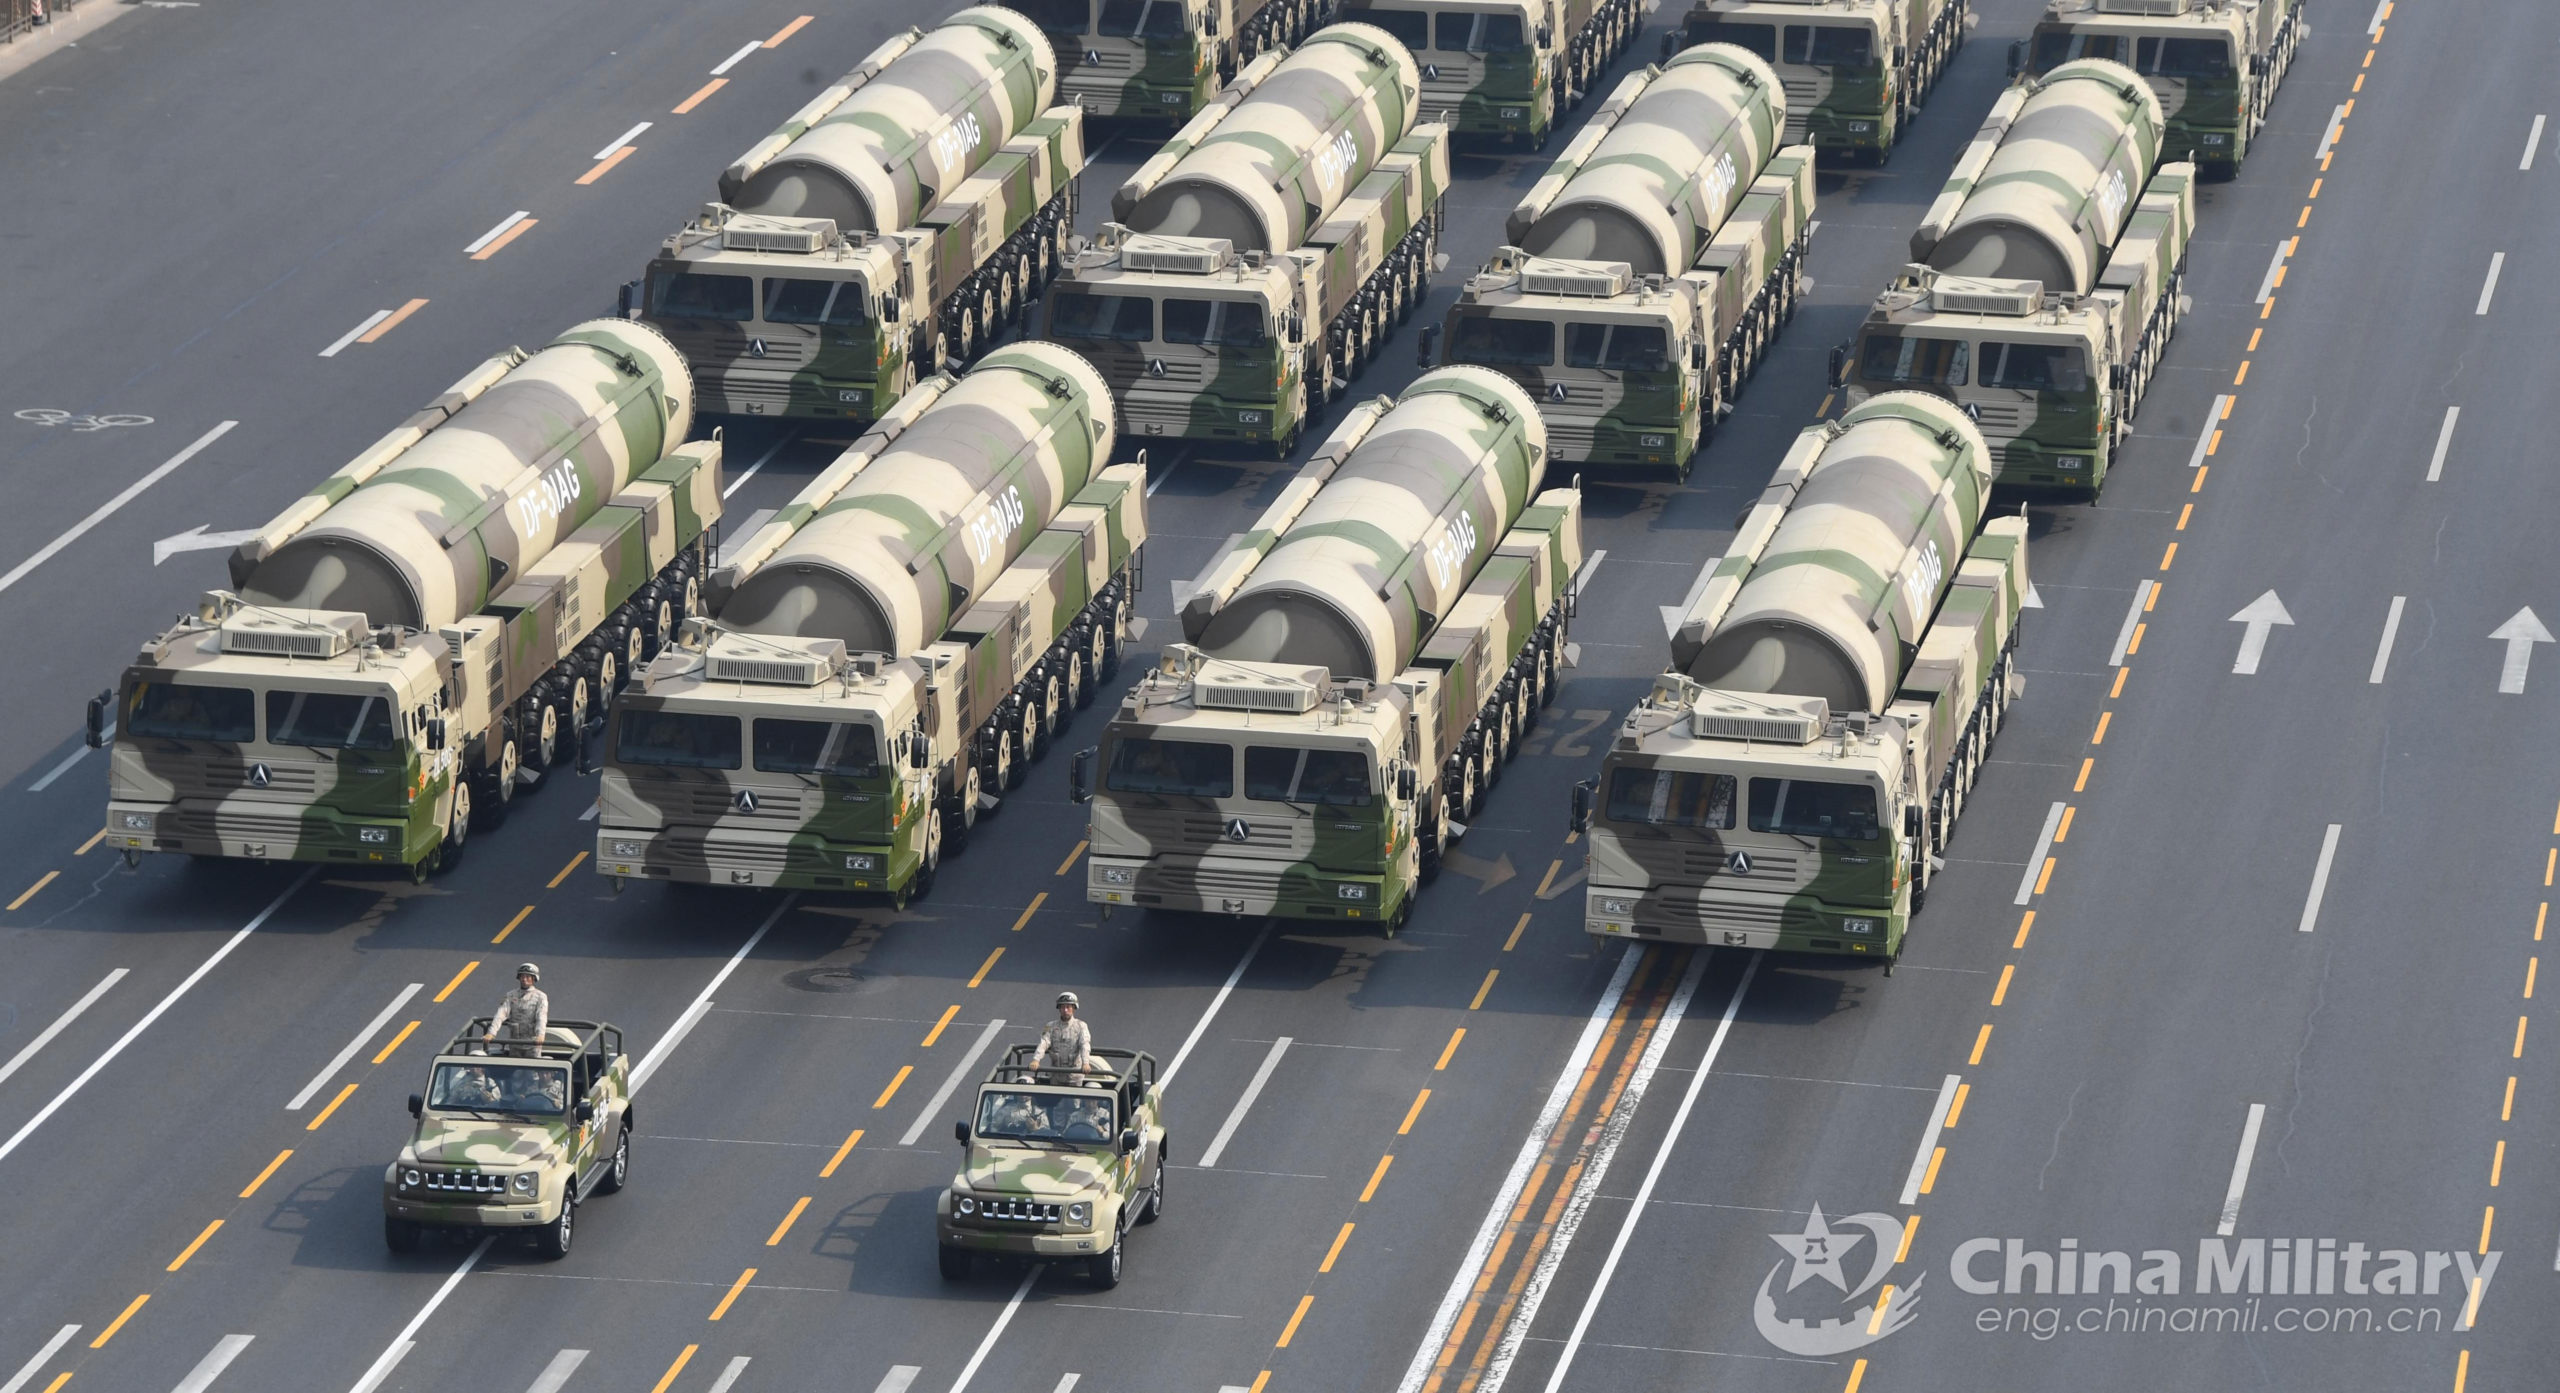 Chinese nuclear missiles takes part in a military parad